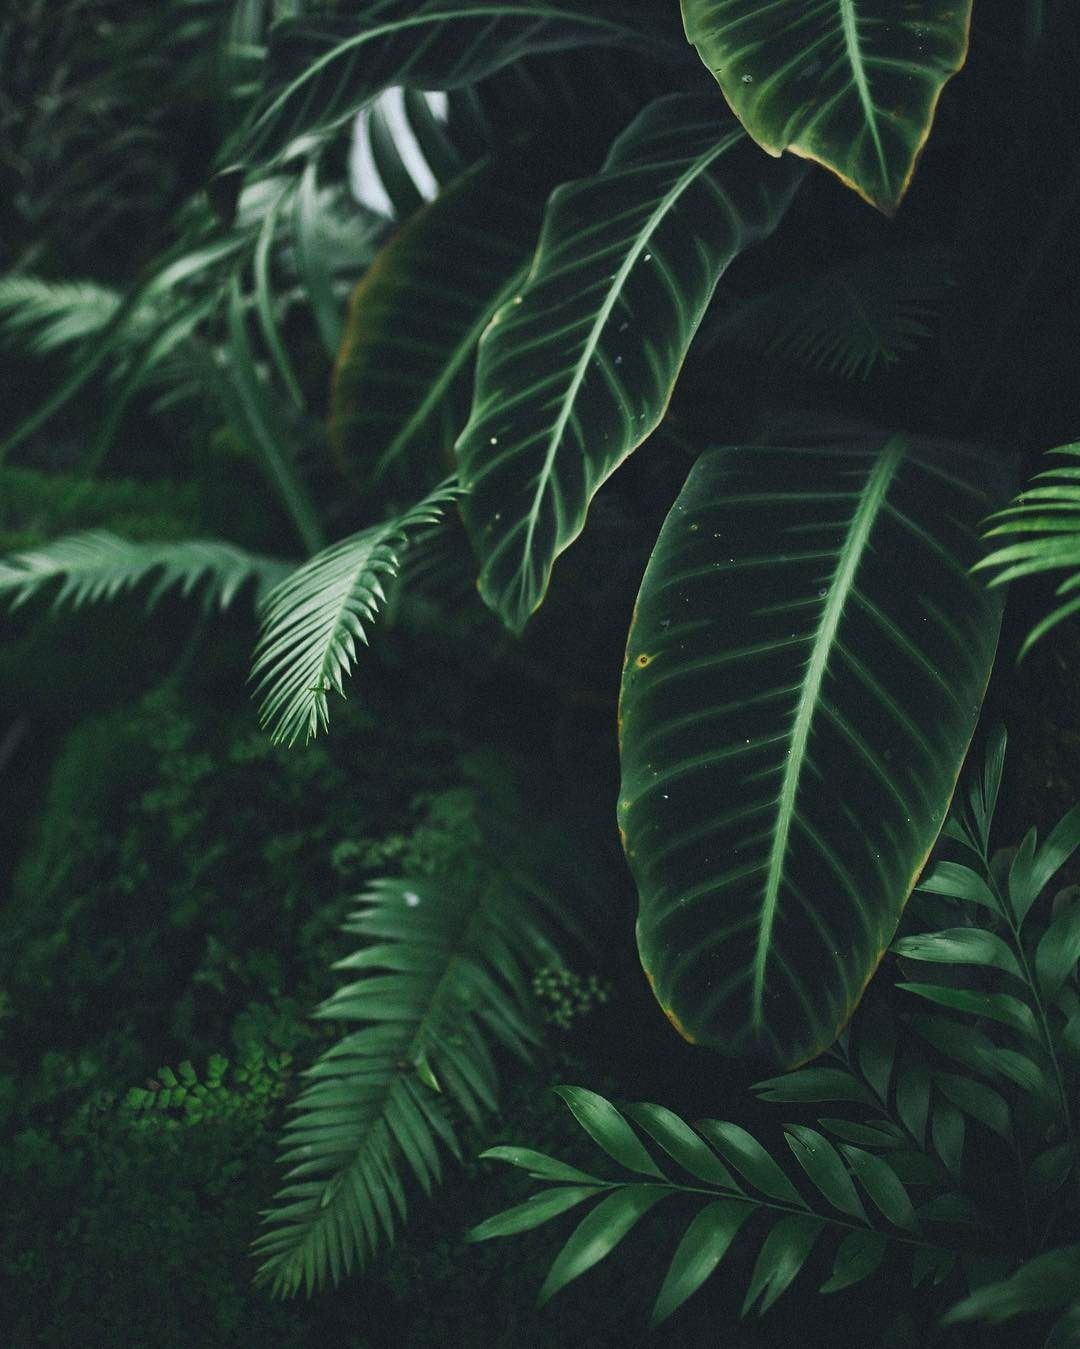 A close up of some green leaves - Nature, tropical, jungle, plants, dark green